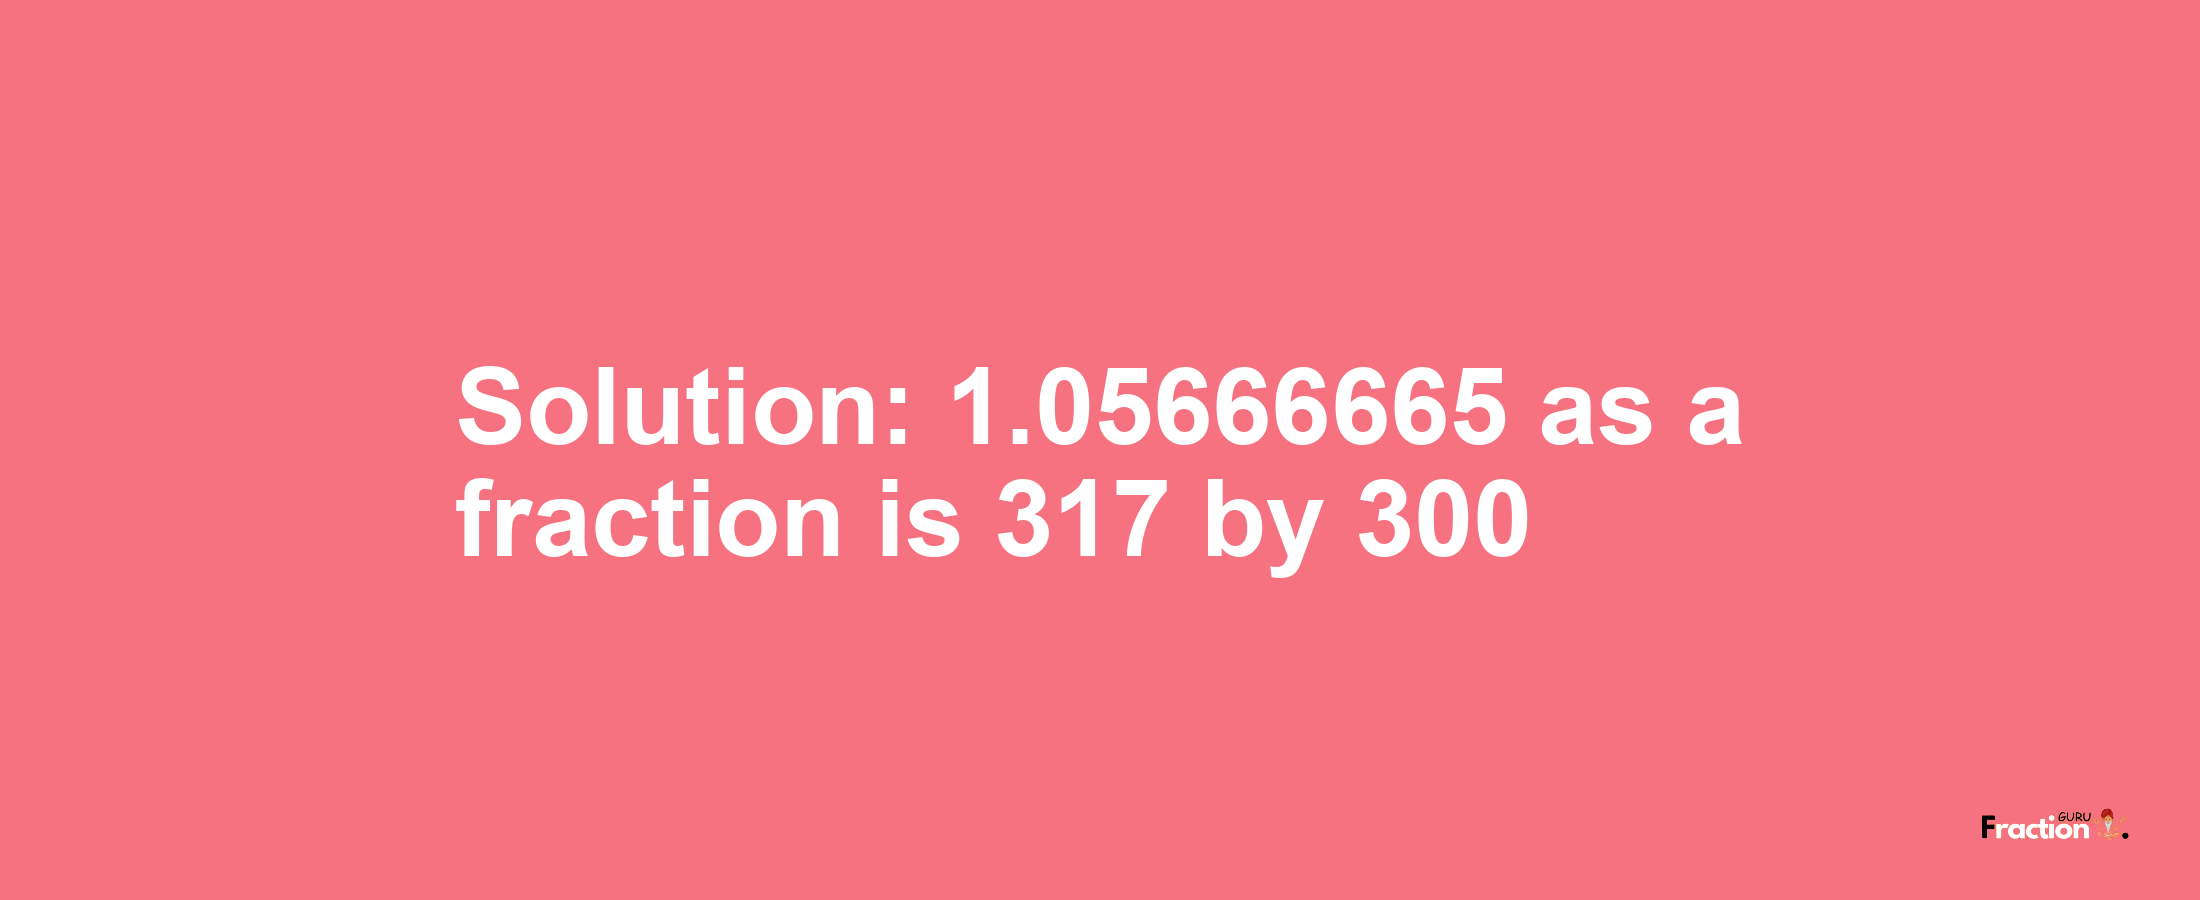 Solution:1.05666665 as a fraction is 317/300